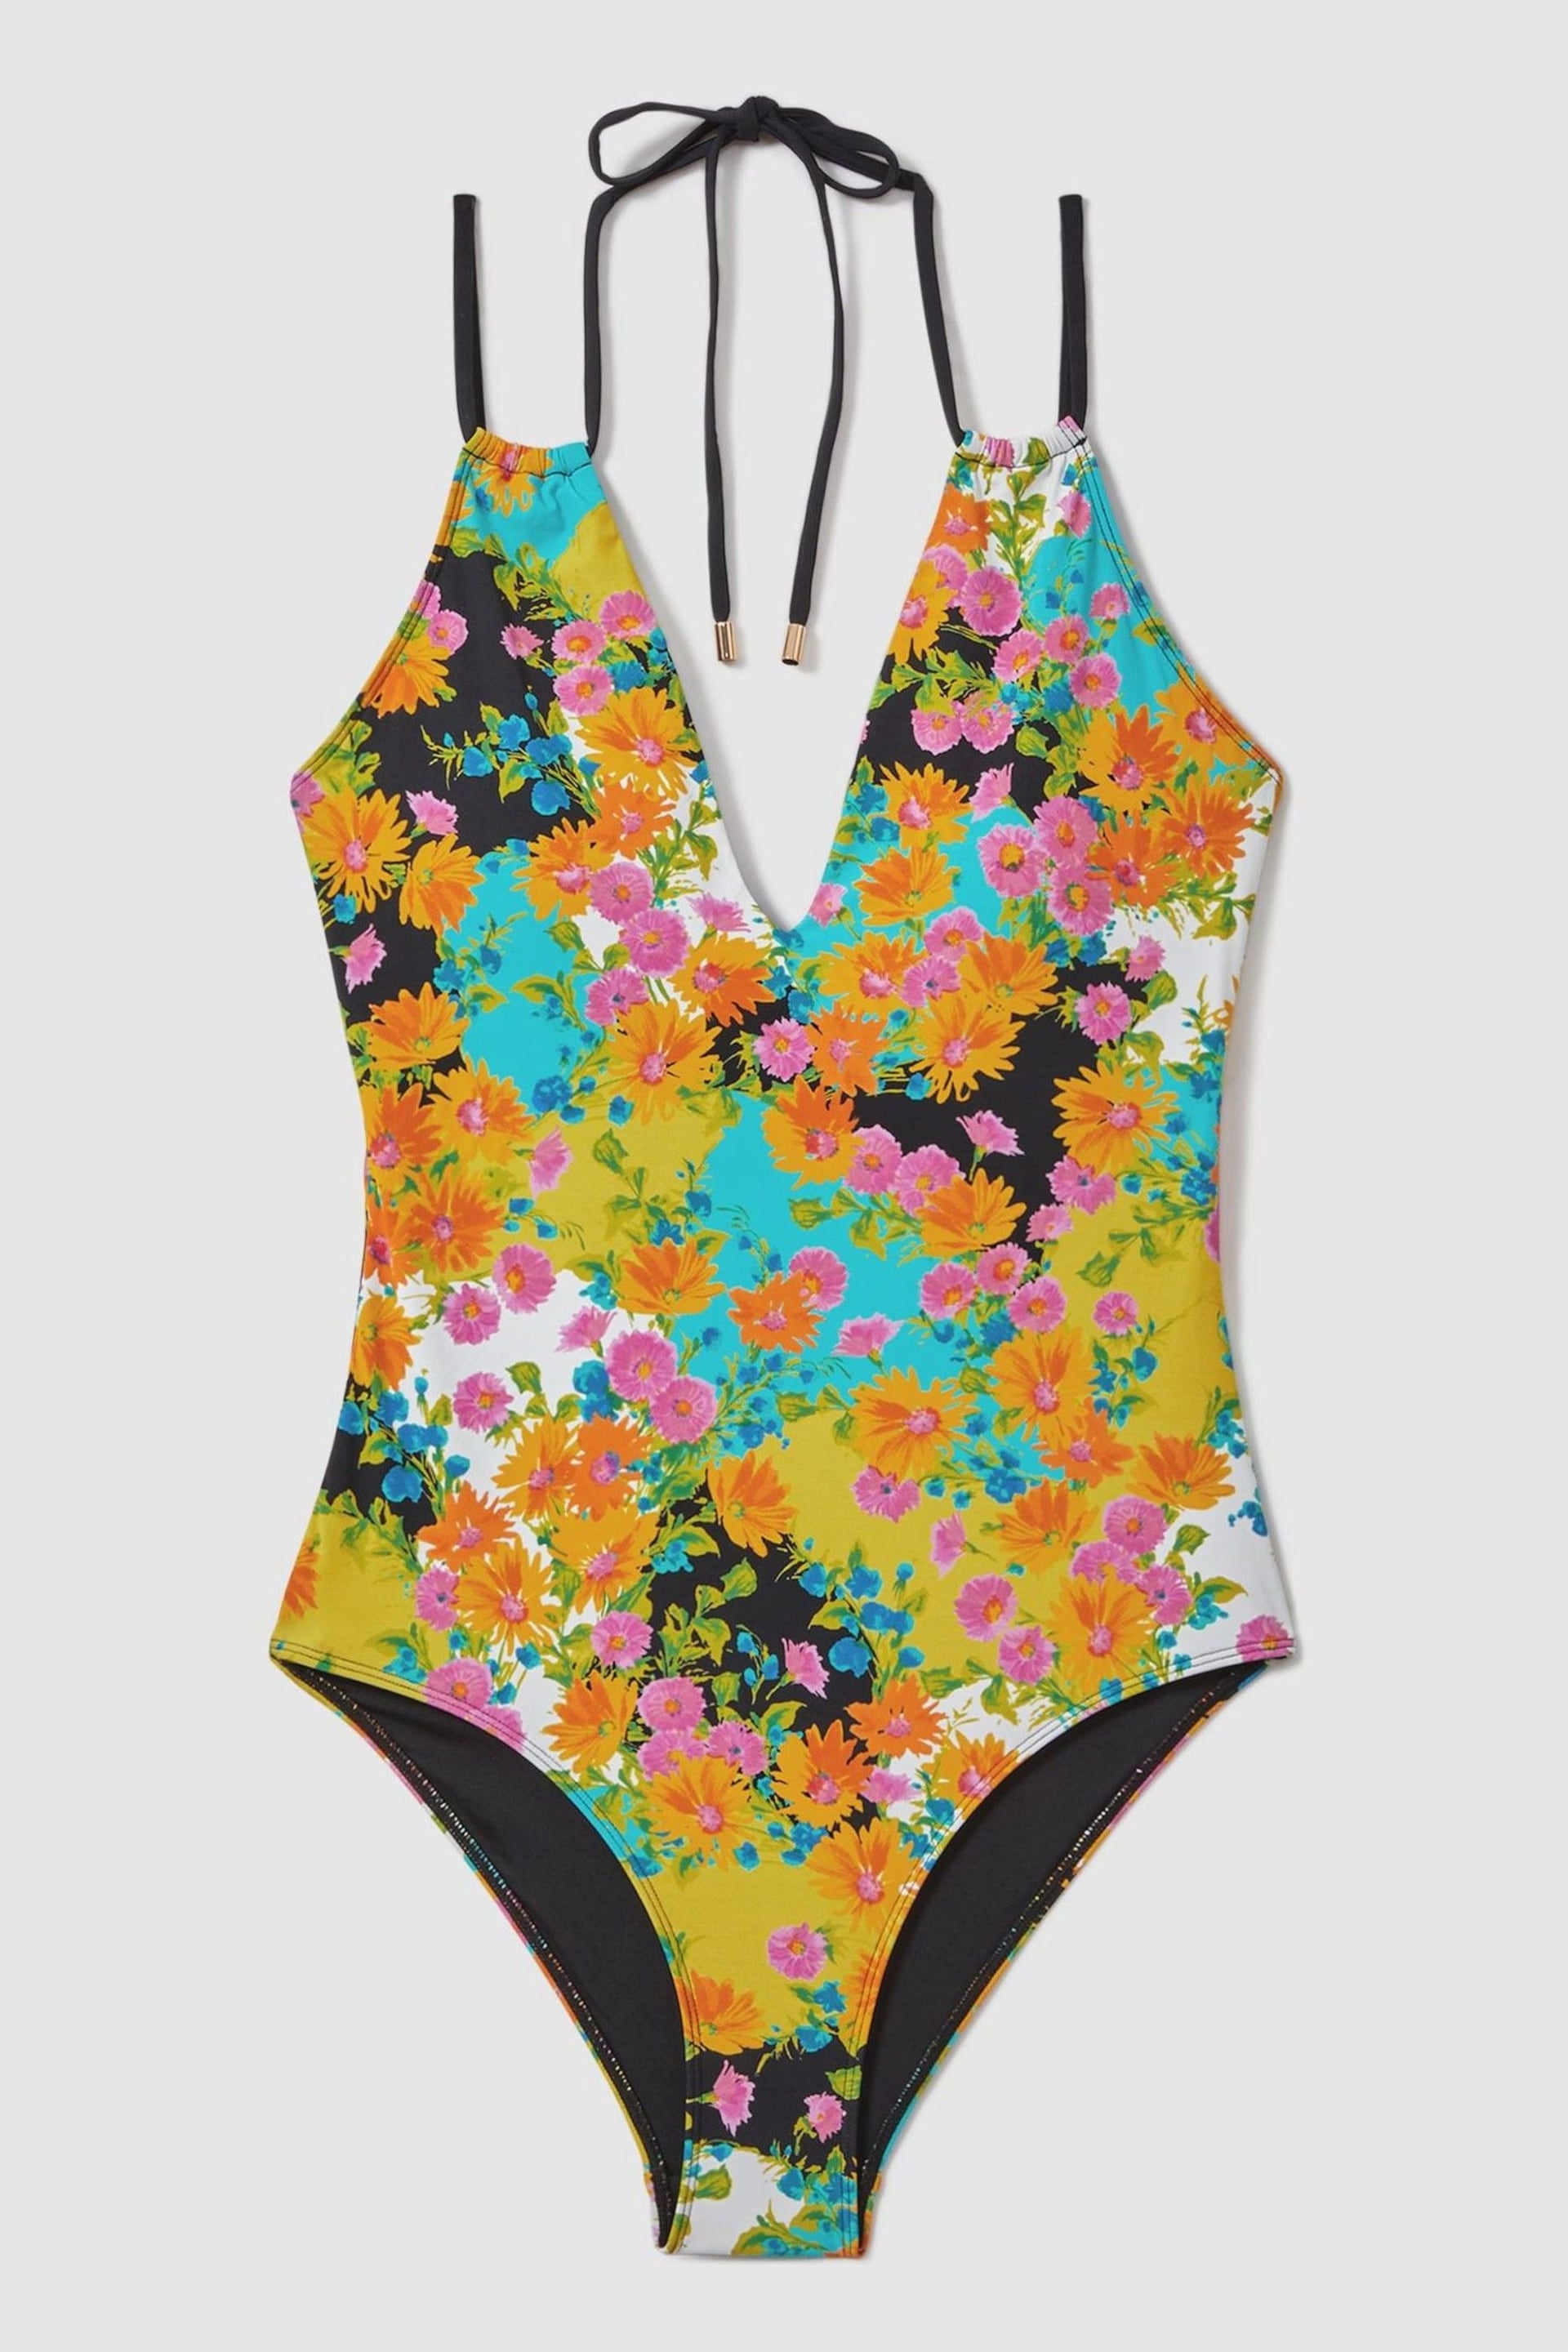 Florere Printed Dual Strap Swimsuit - Image 2 of 5